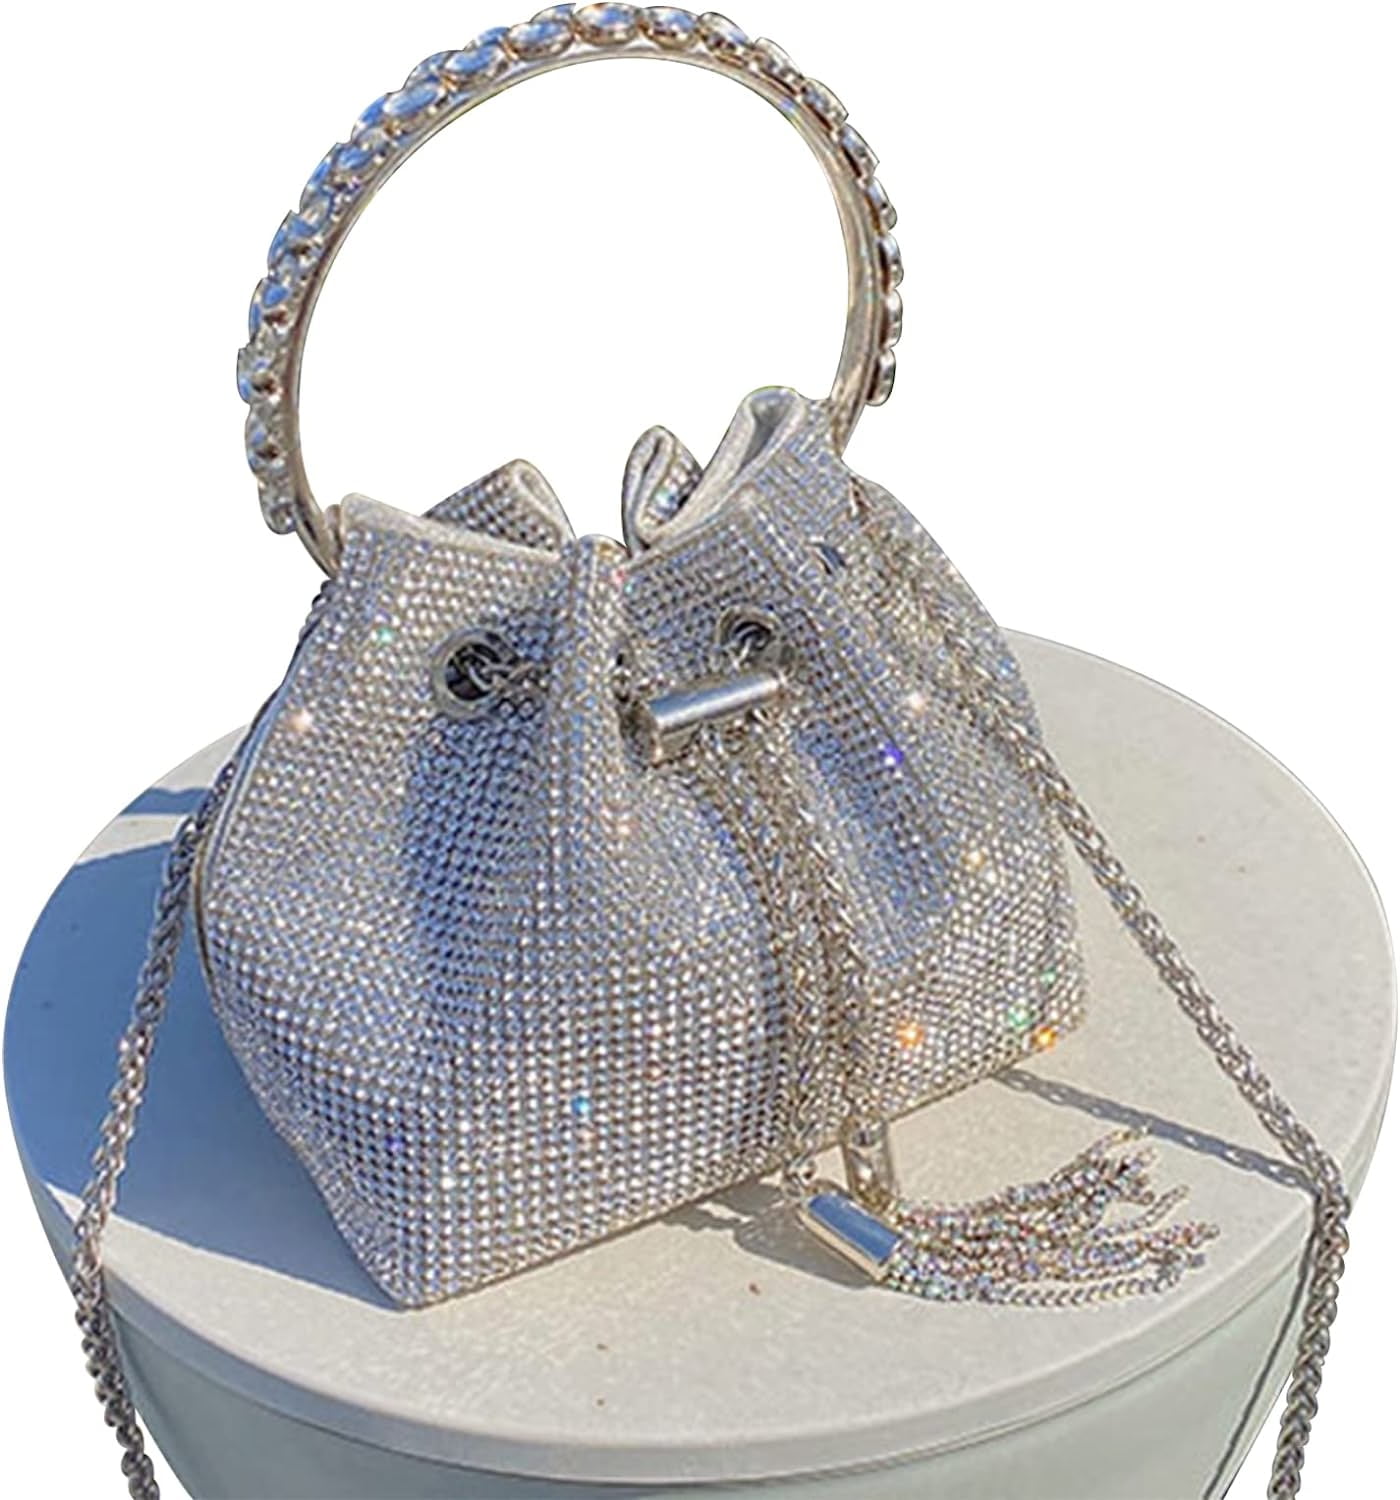 Silver Soft Leather Metallic Bucket Bag with Crossbody Chain Purse for Dresses